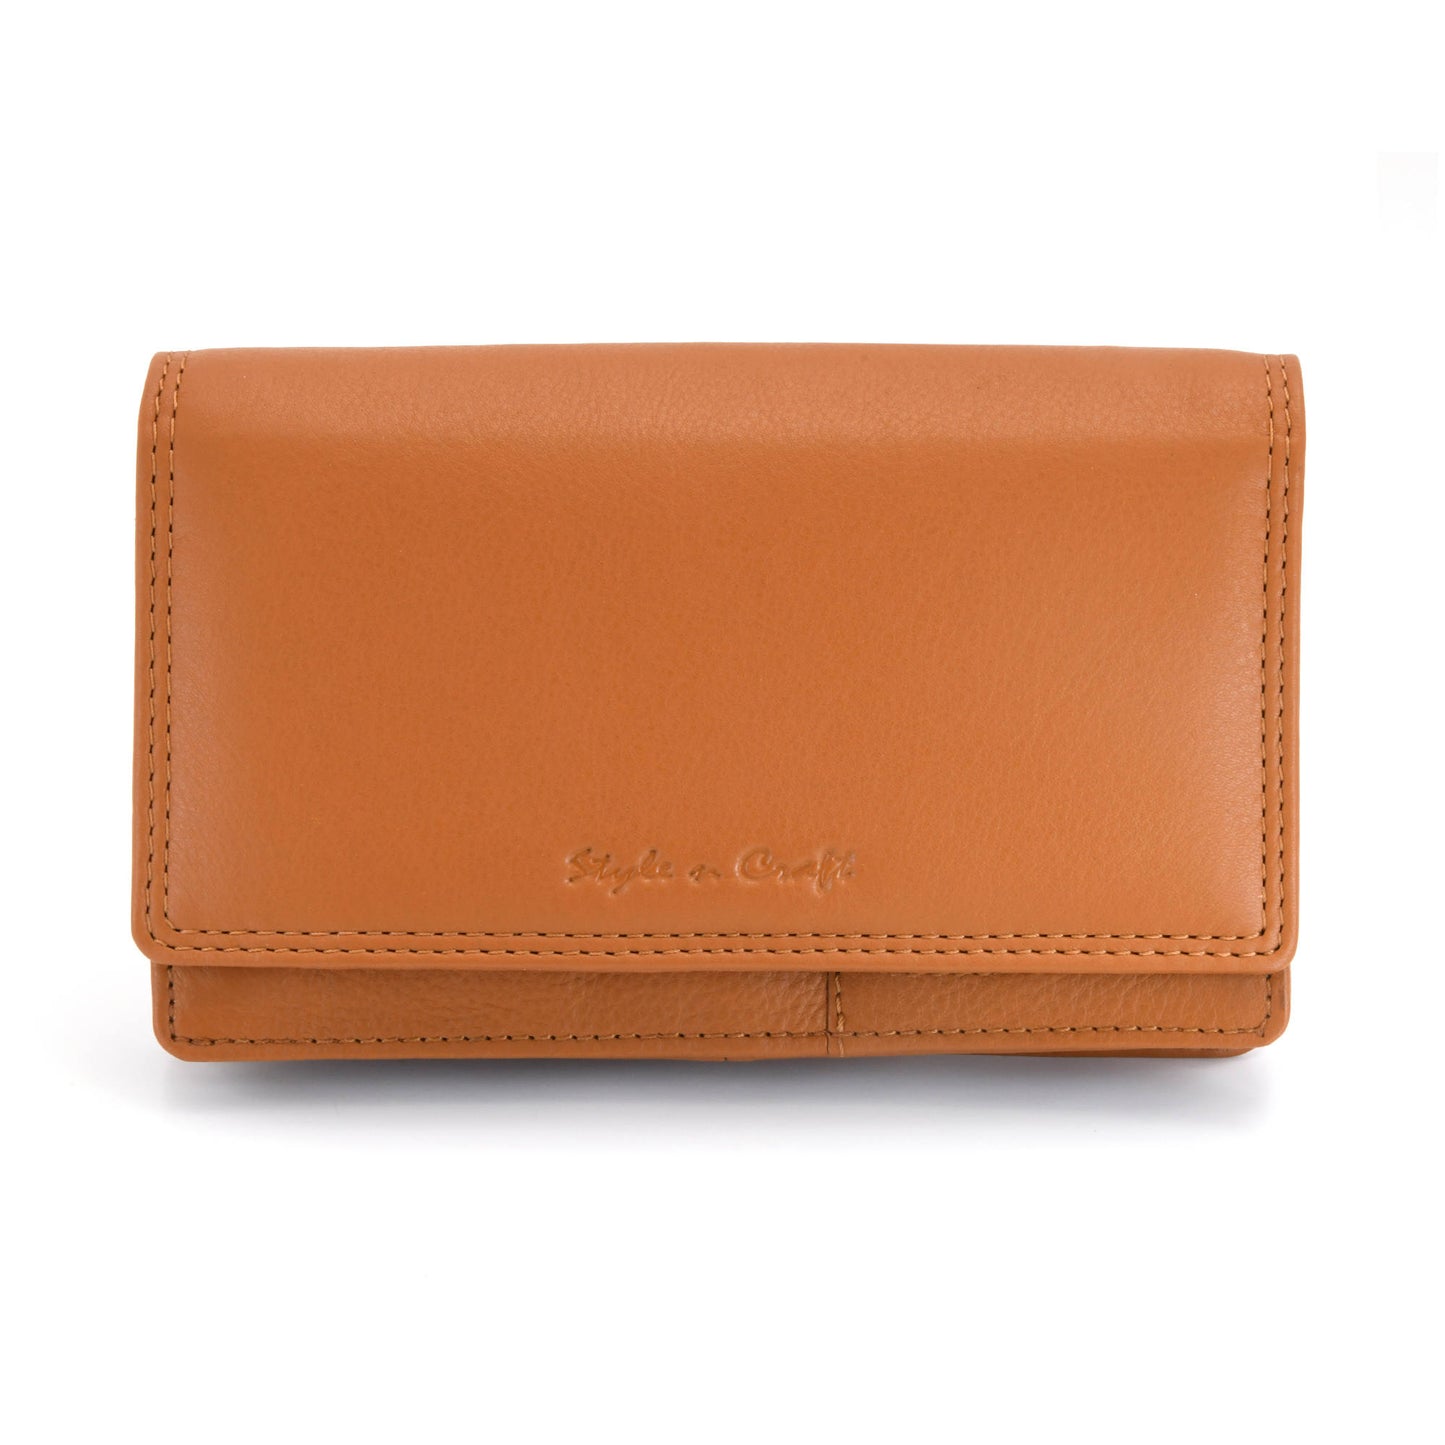 Style n Craft - 300956 Ladies Clutch Wallet in Leather - tan color - closed view front